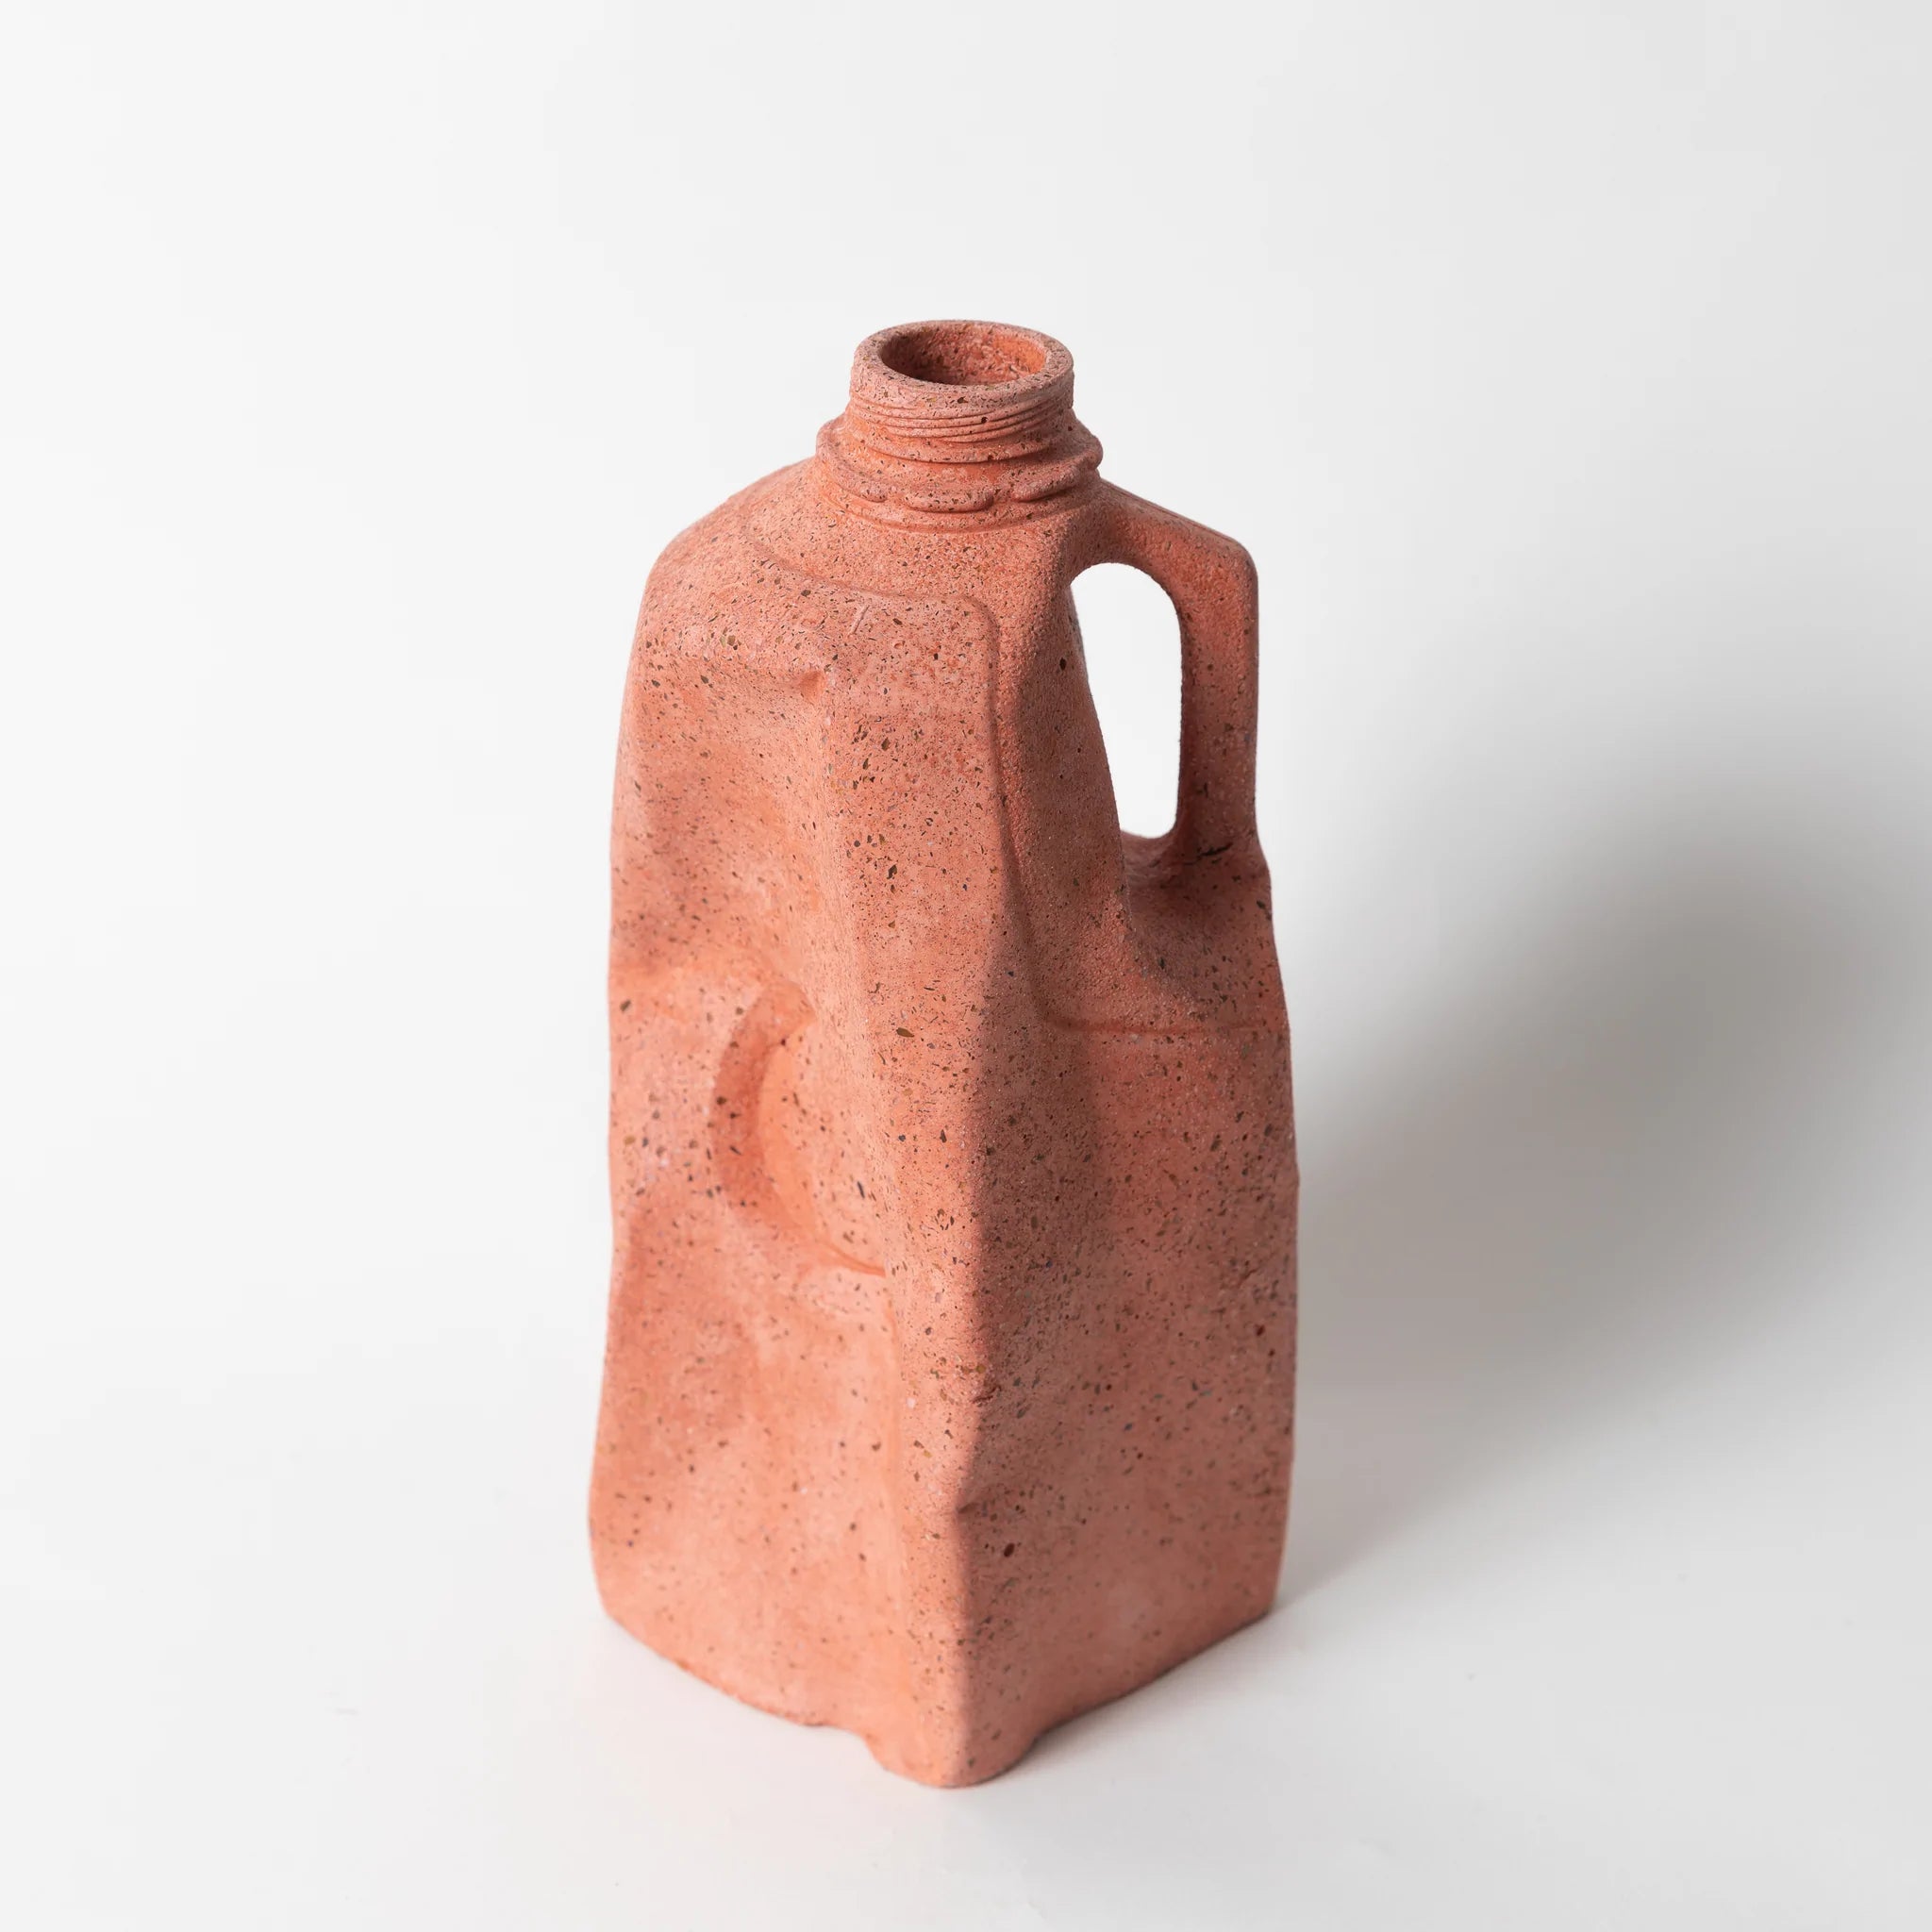 The Garbage Collection: Milk Jug